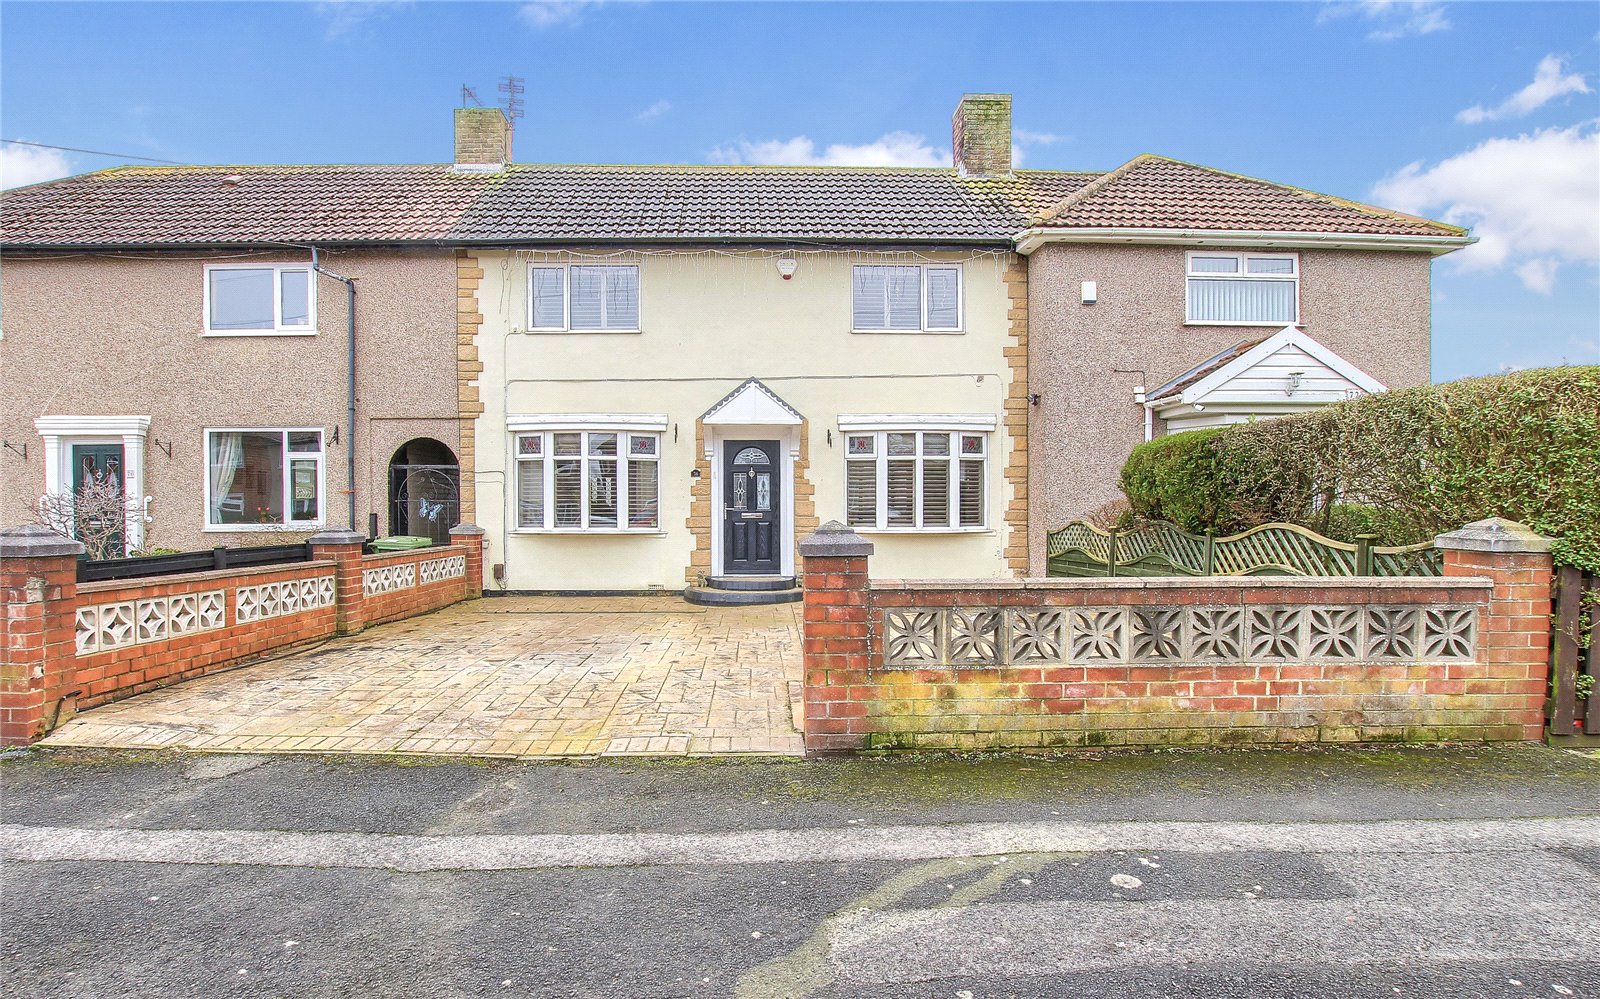 3 bed house for sale in Stokesley Crescent, Billingham  - Property Image 1